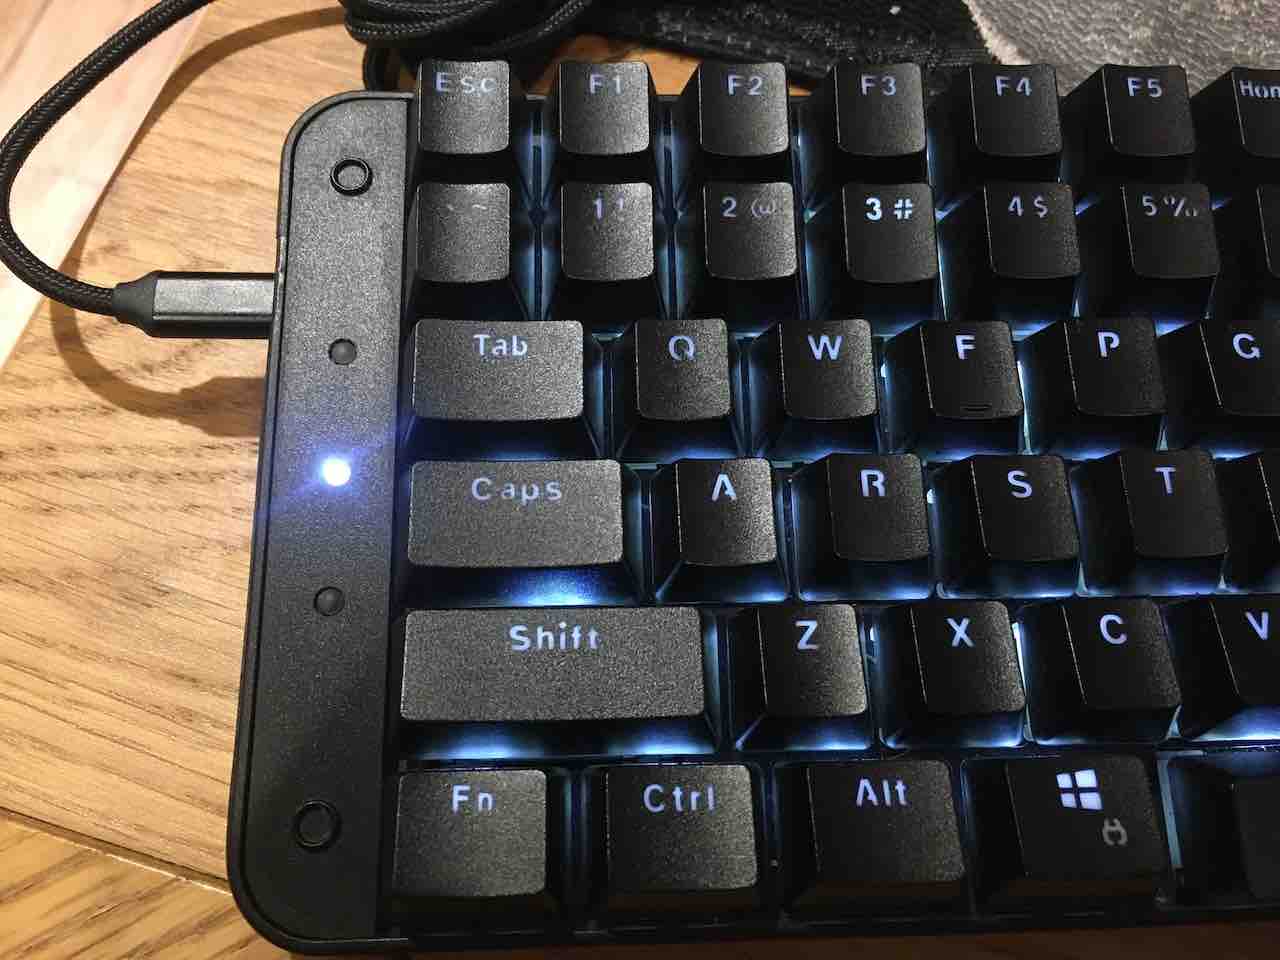 Keyboard LED when Profile 1 is active